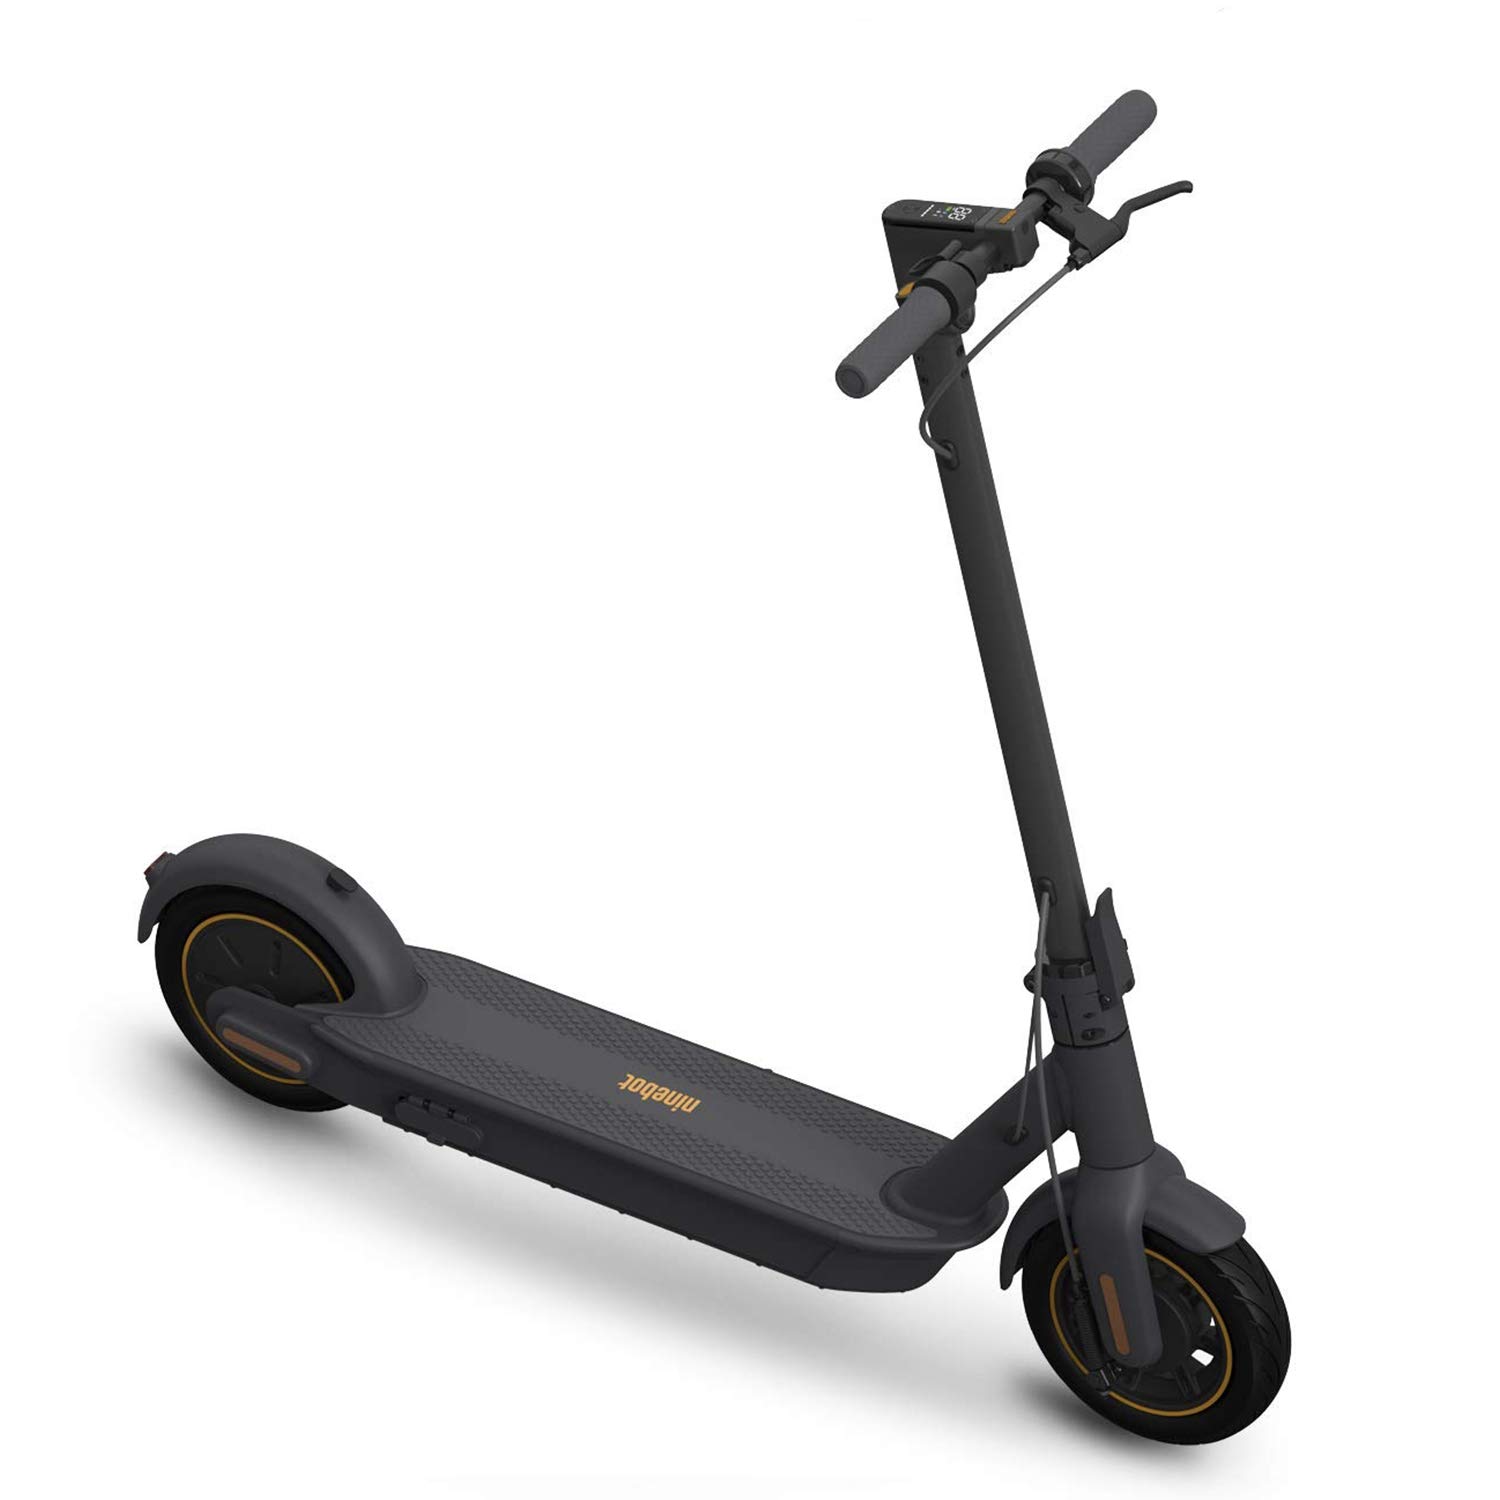 Segway Ninebot MAX Original G30P Electric Scooter $594.99 from Amazon (lowest price ever on amazon)